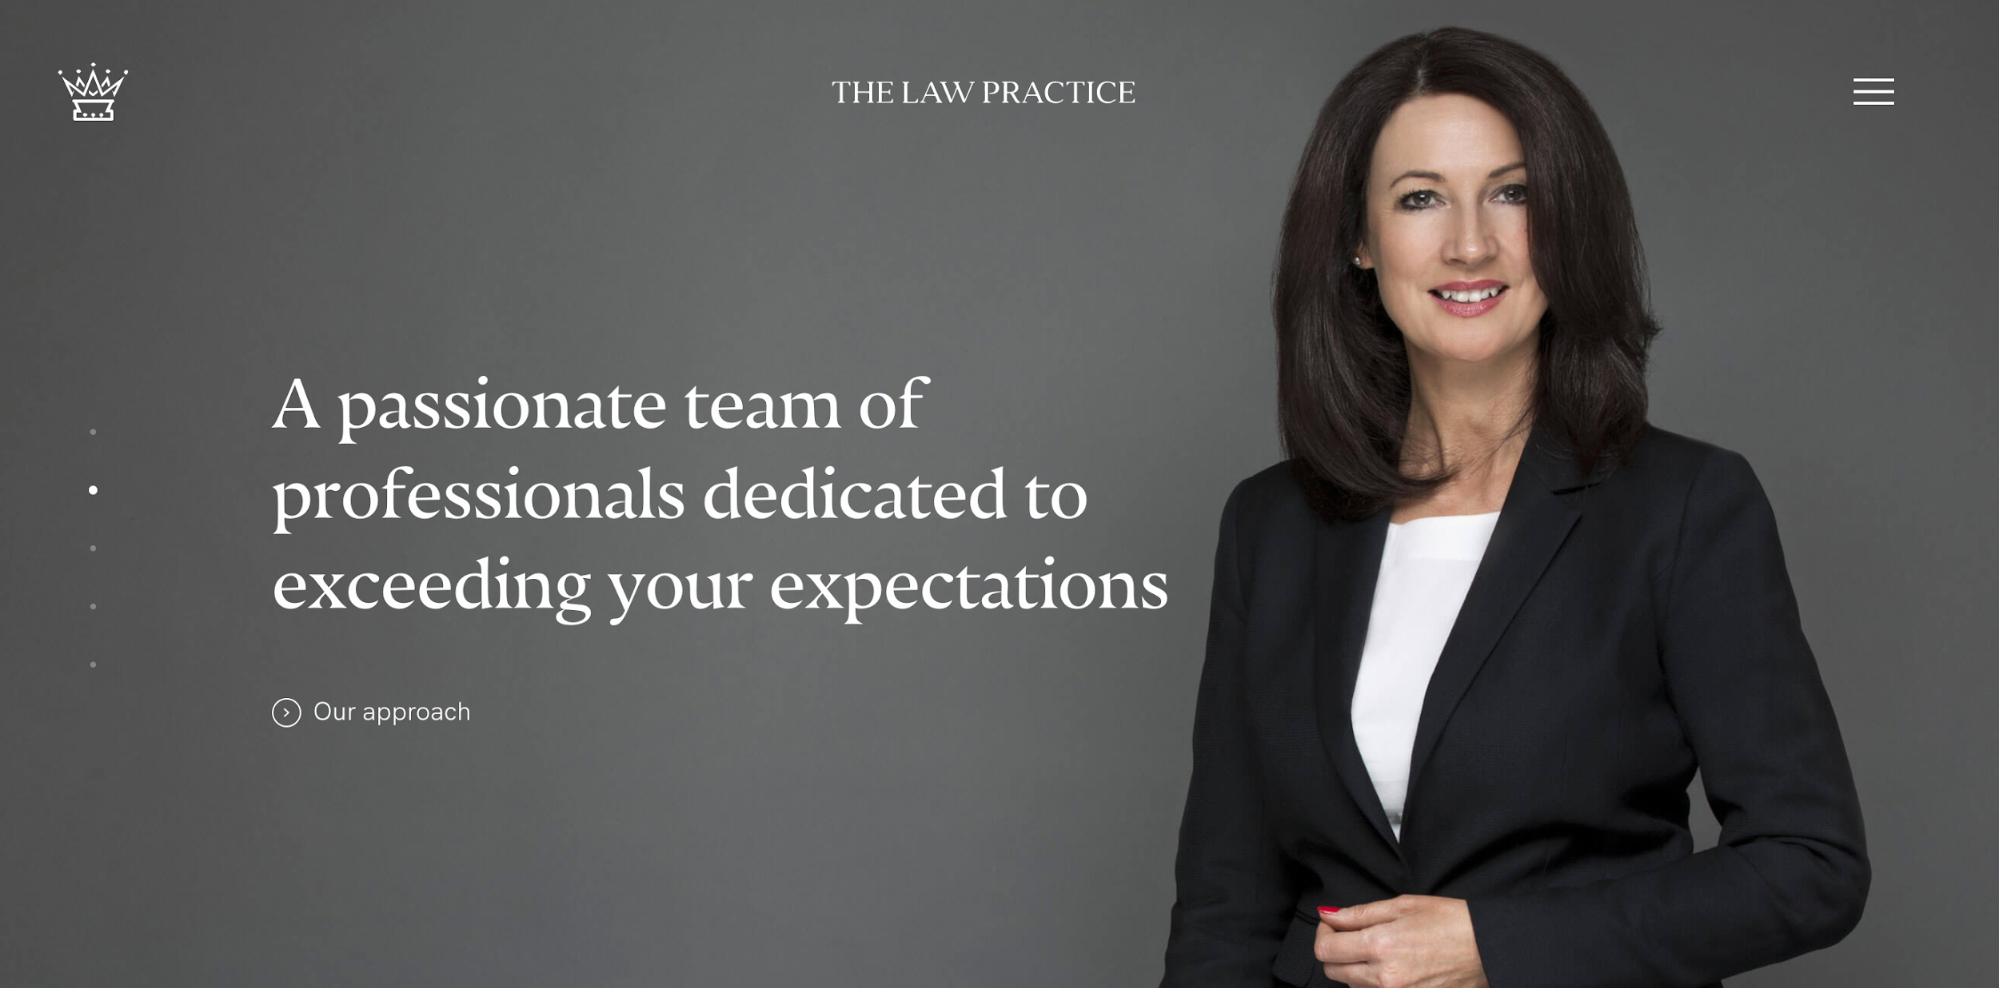 The Law Practice uses a human image for better customer connection